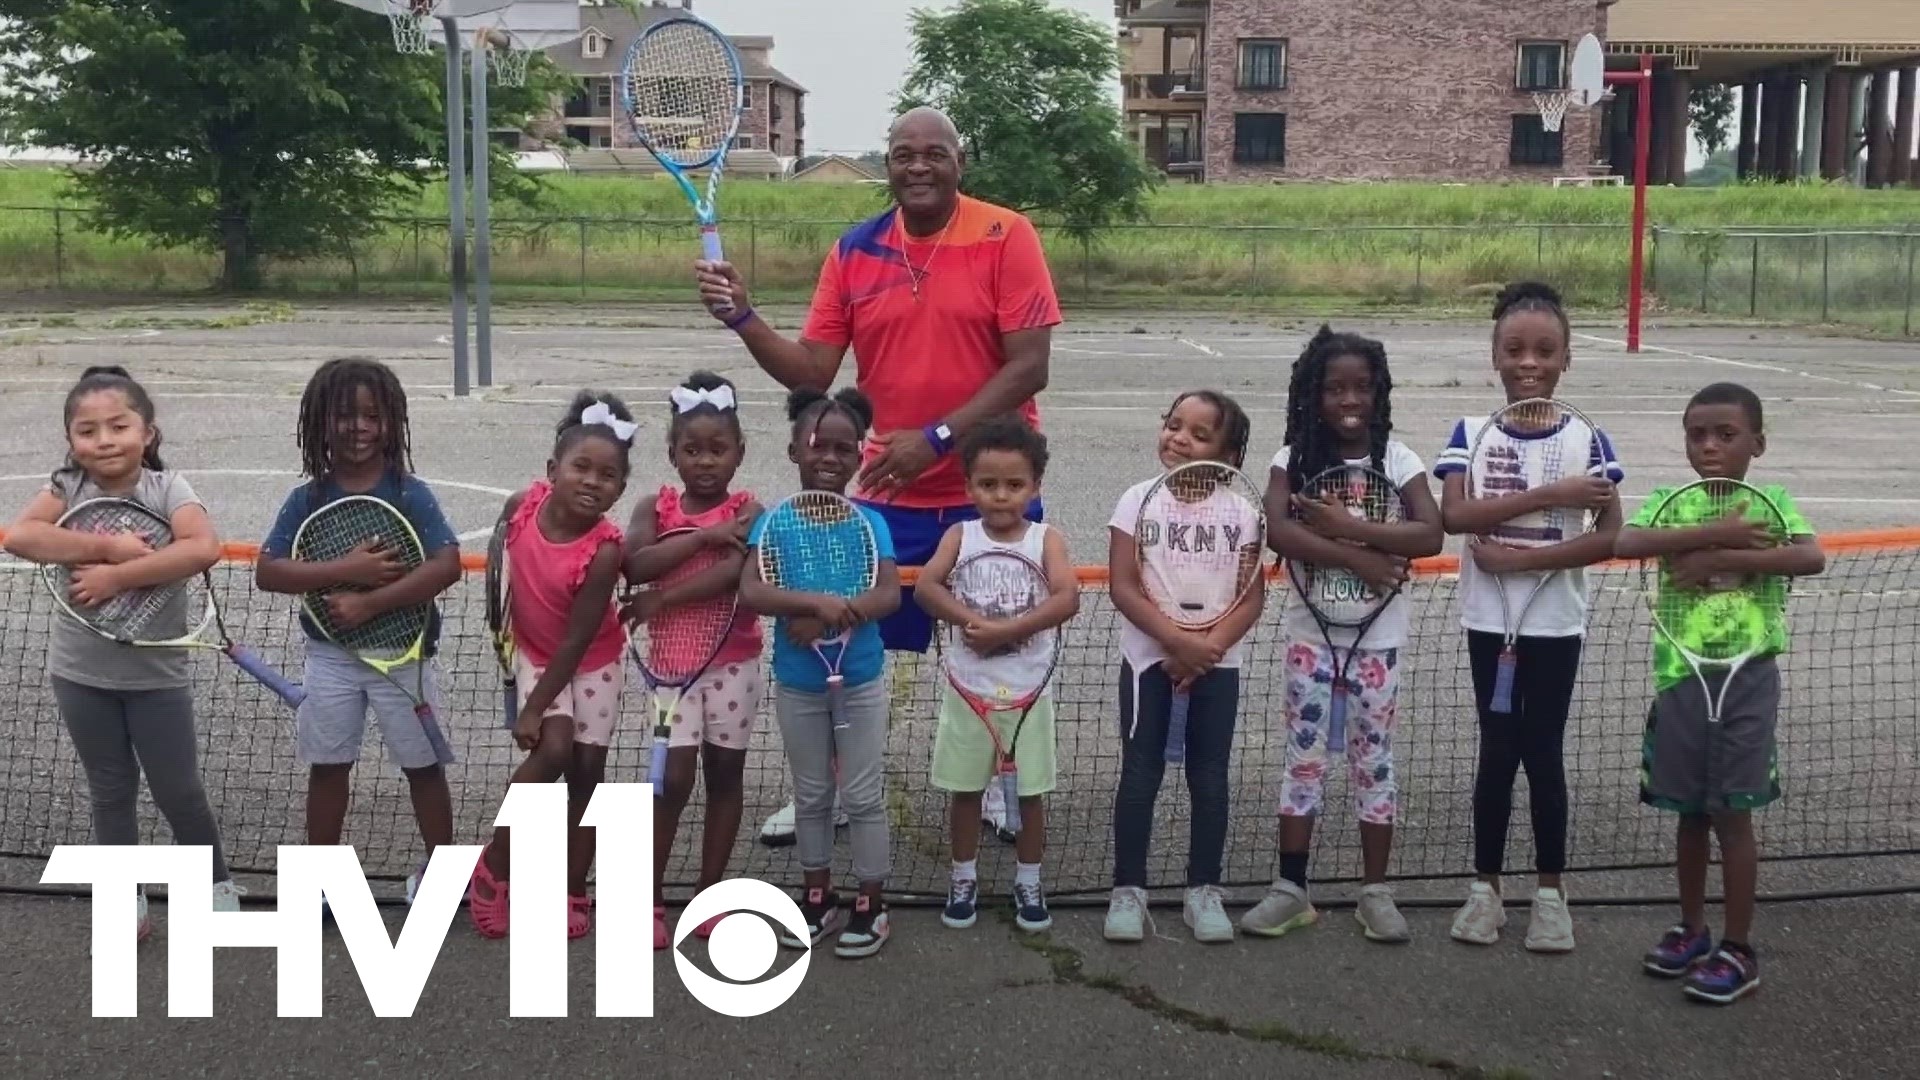 Kreth Simmons has been a father figure to a generation of kids for nearly two decades since opening the Baseline Tennis Center.